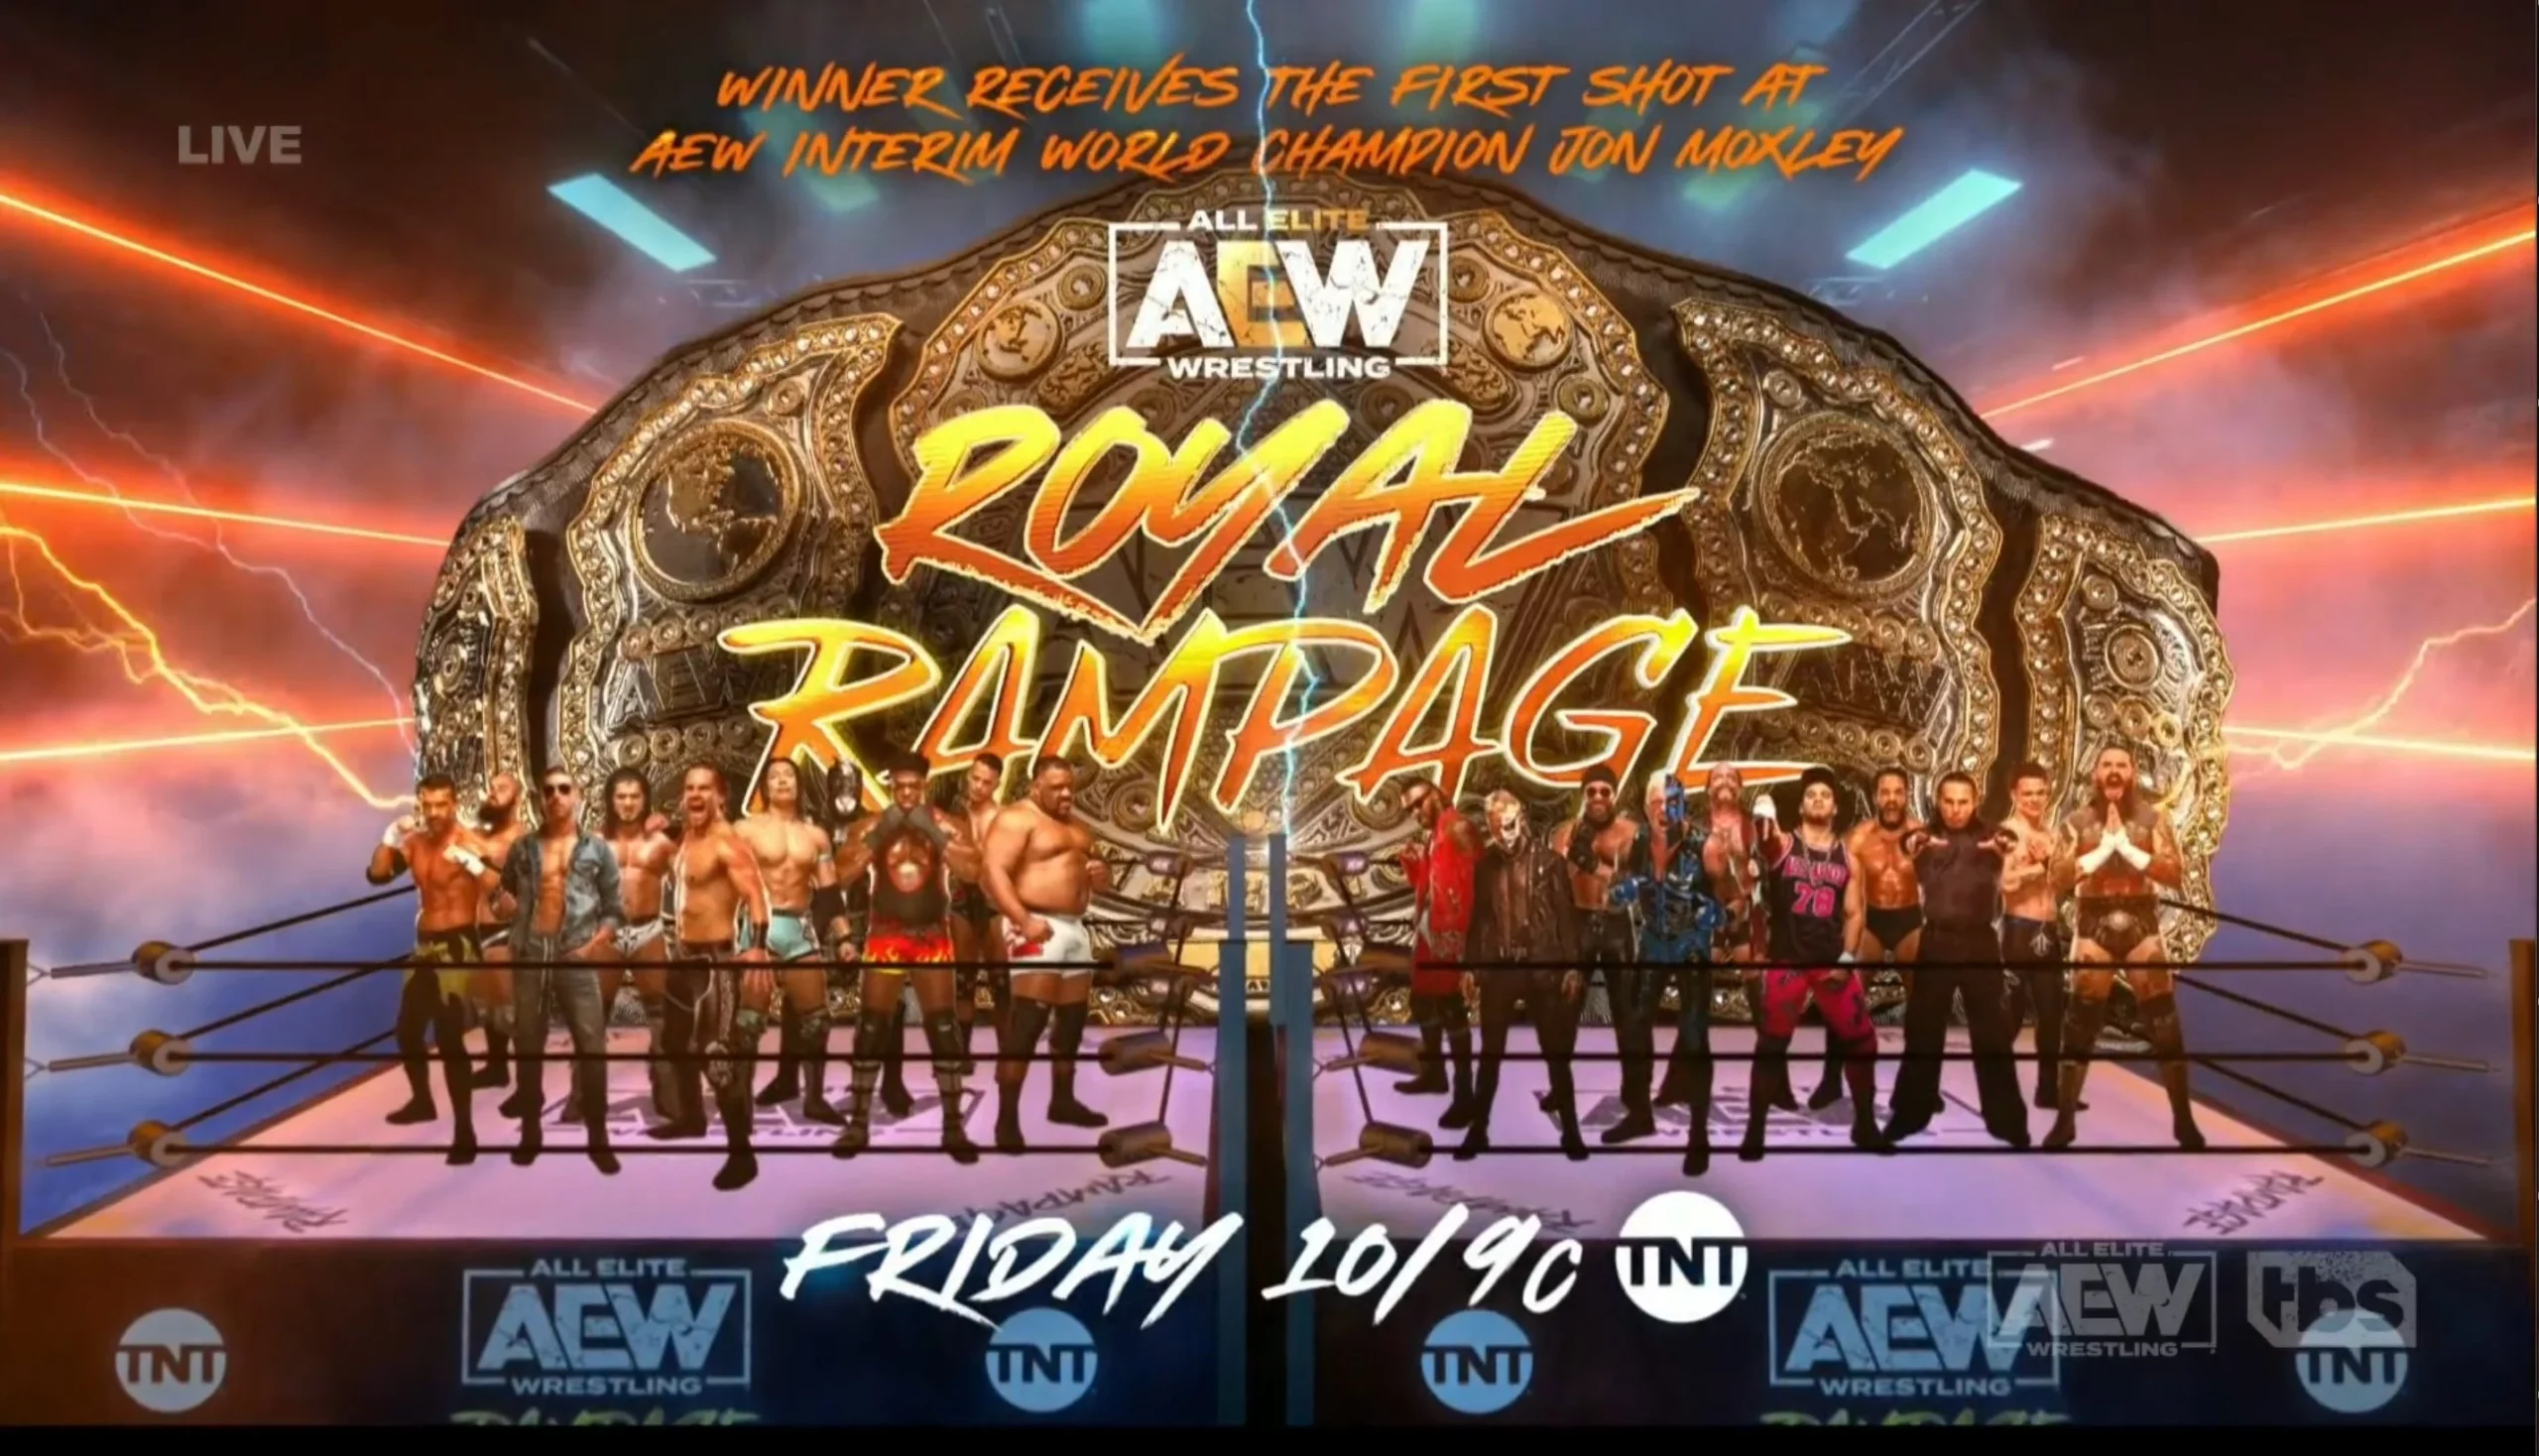 Big Matches Including ‘Royal Rampage’ Announced For AEW Rampage